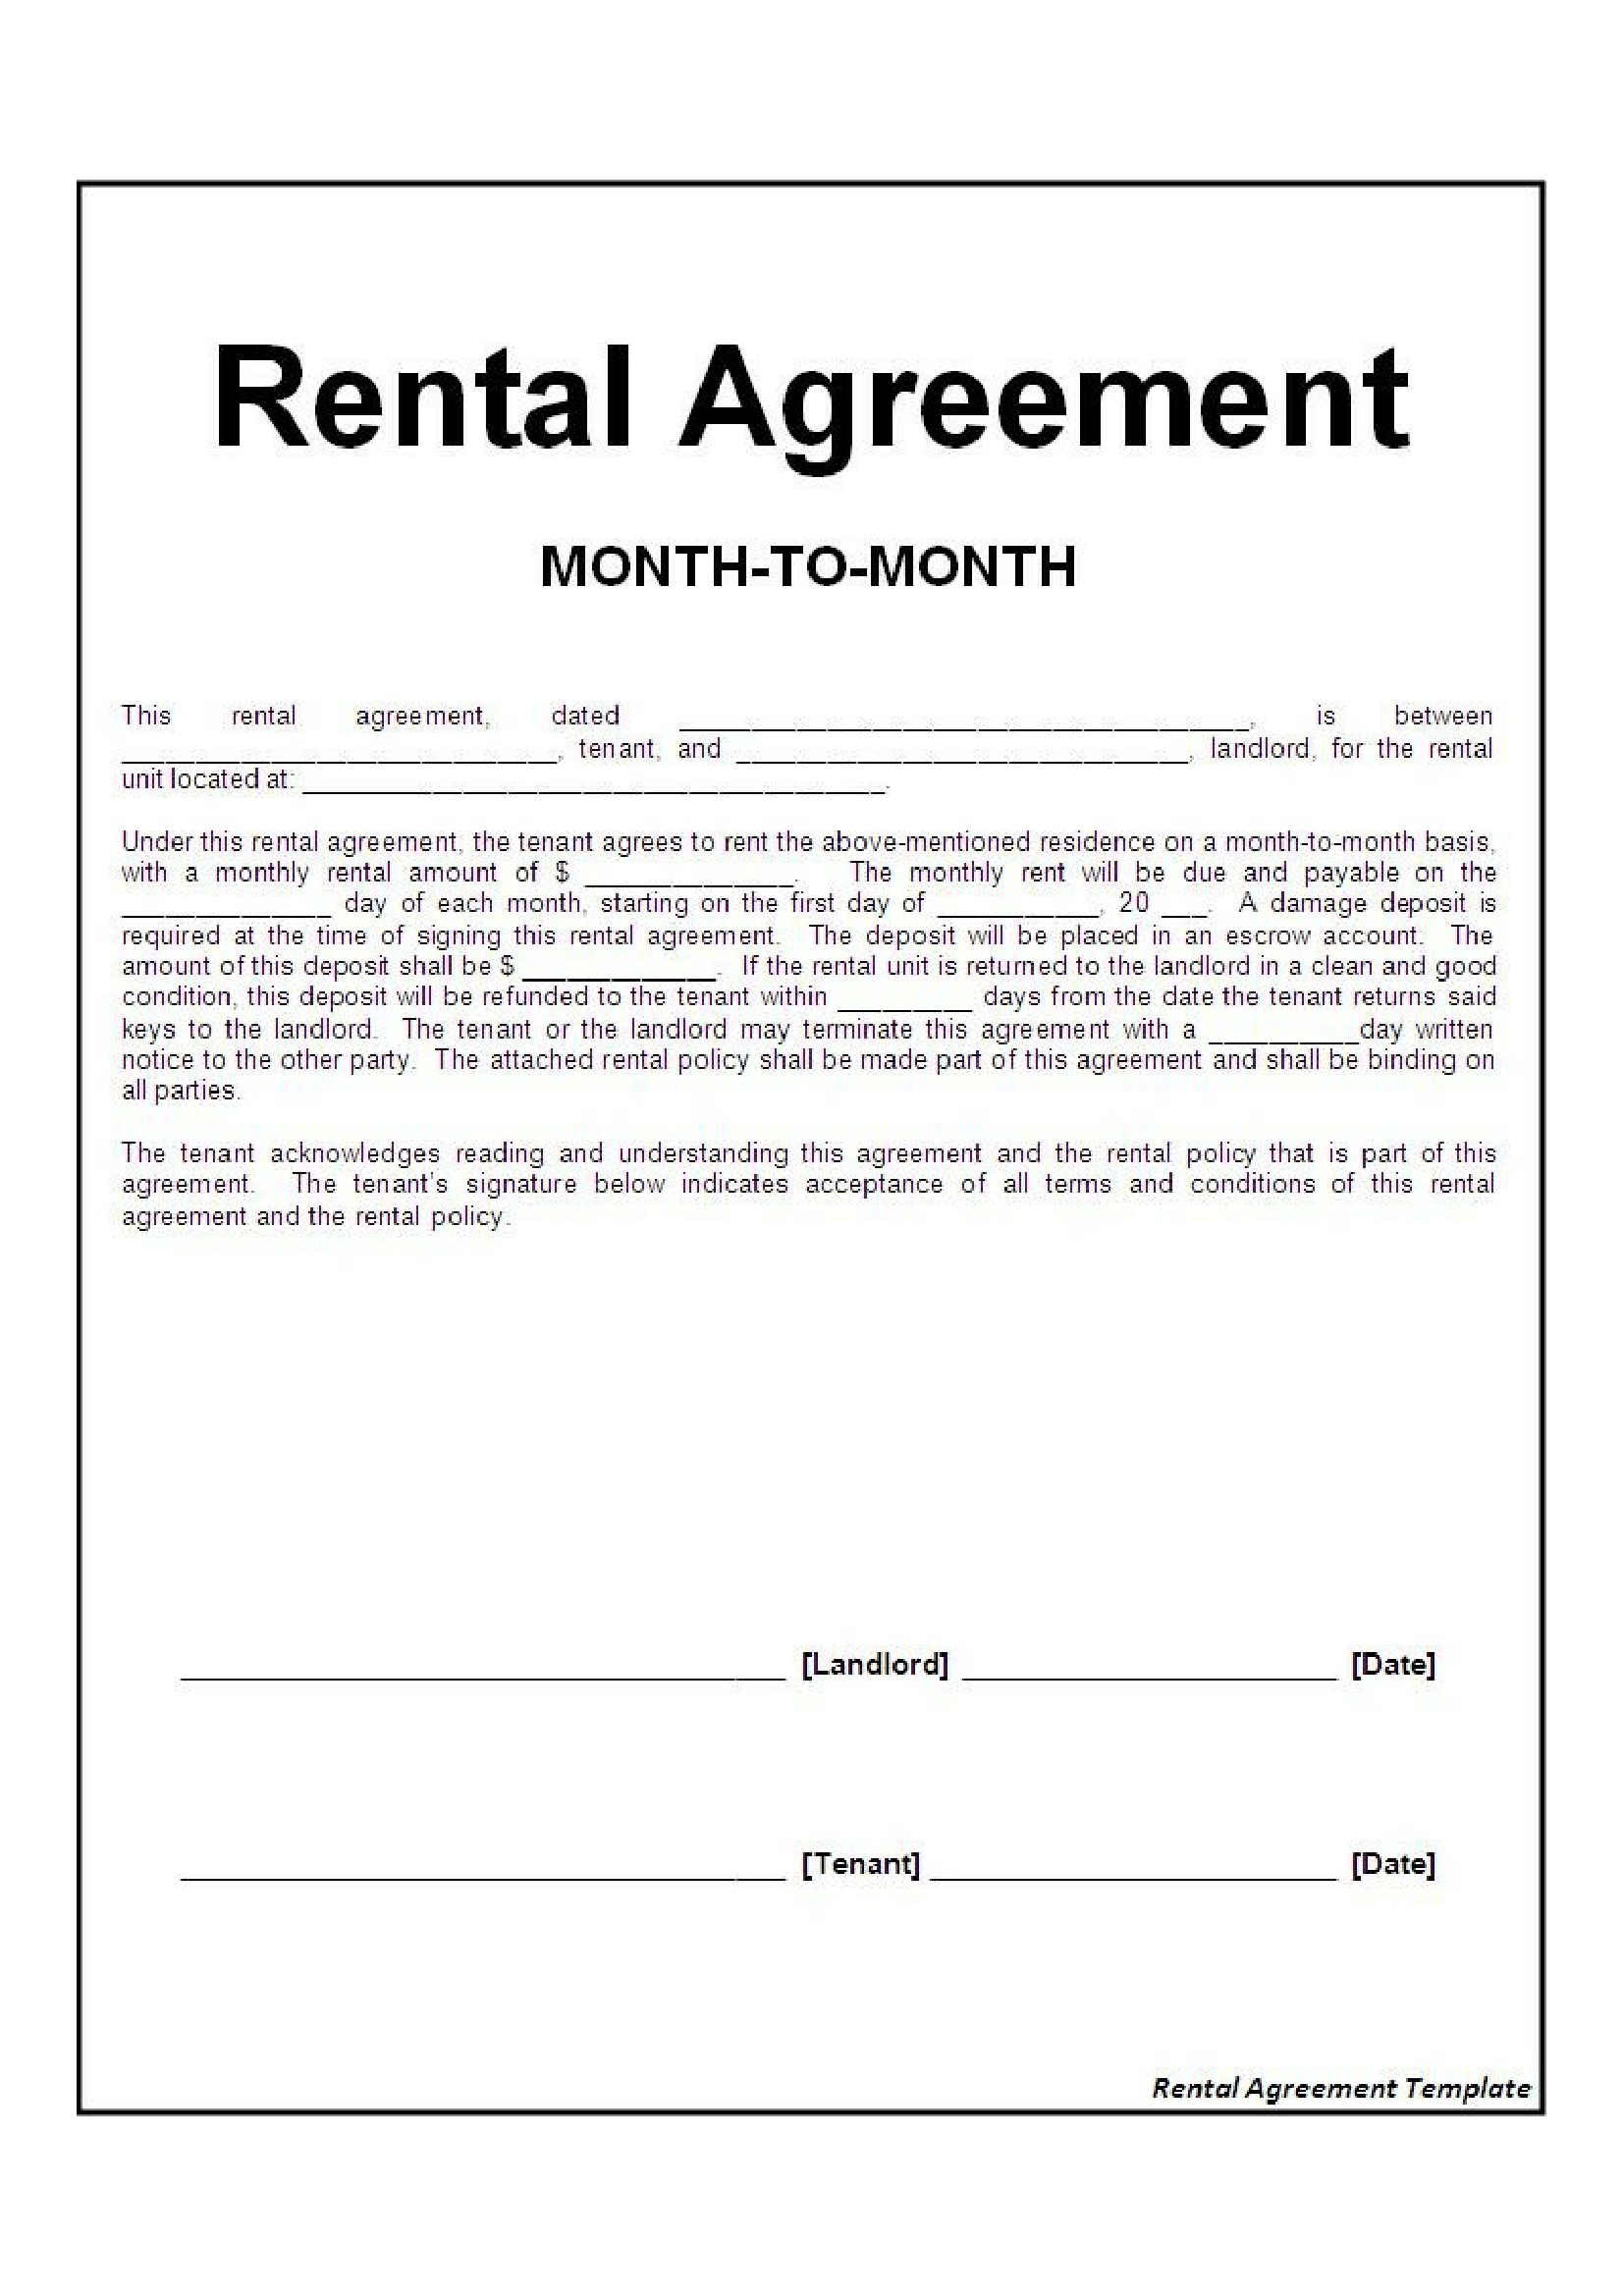 Month To Month Rental Agreement Form FREE Download Rental Agreement 